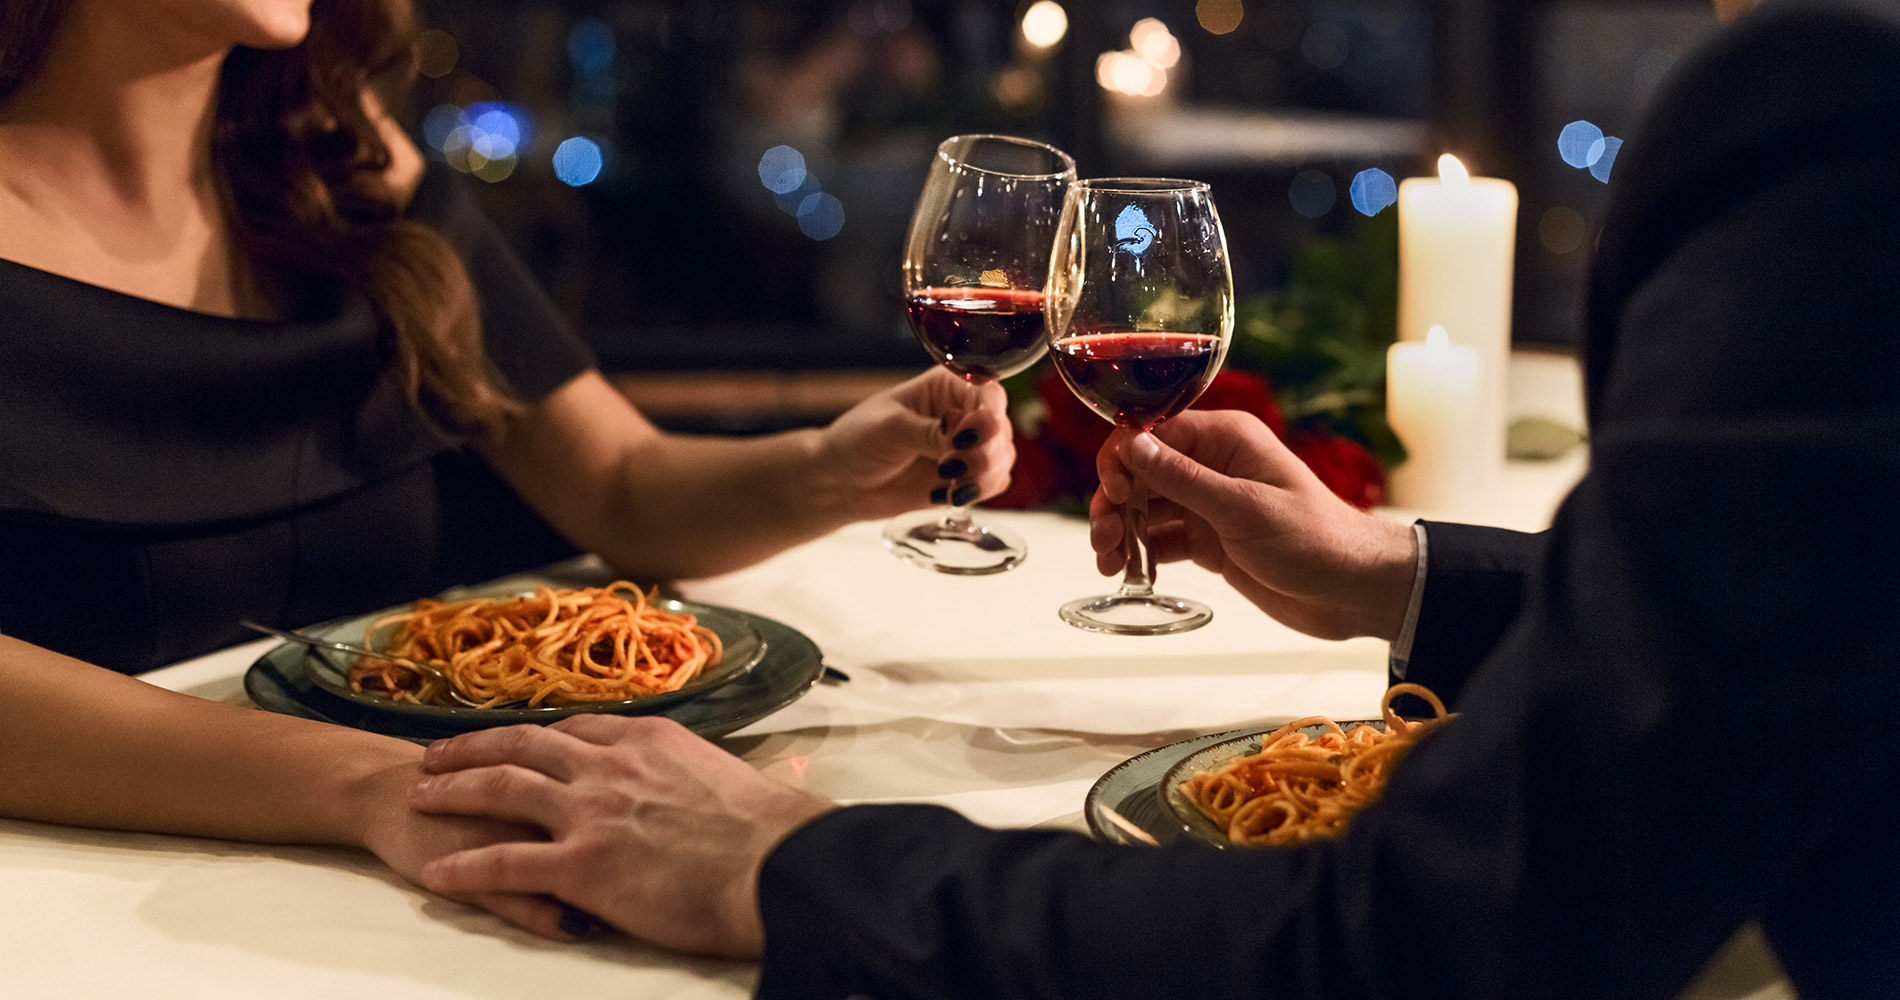 Elegant couple at the table, with plates of spaghetti and glasses of red wine